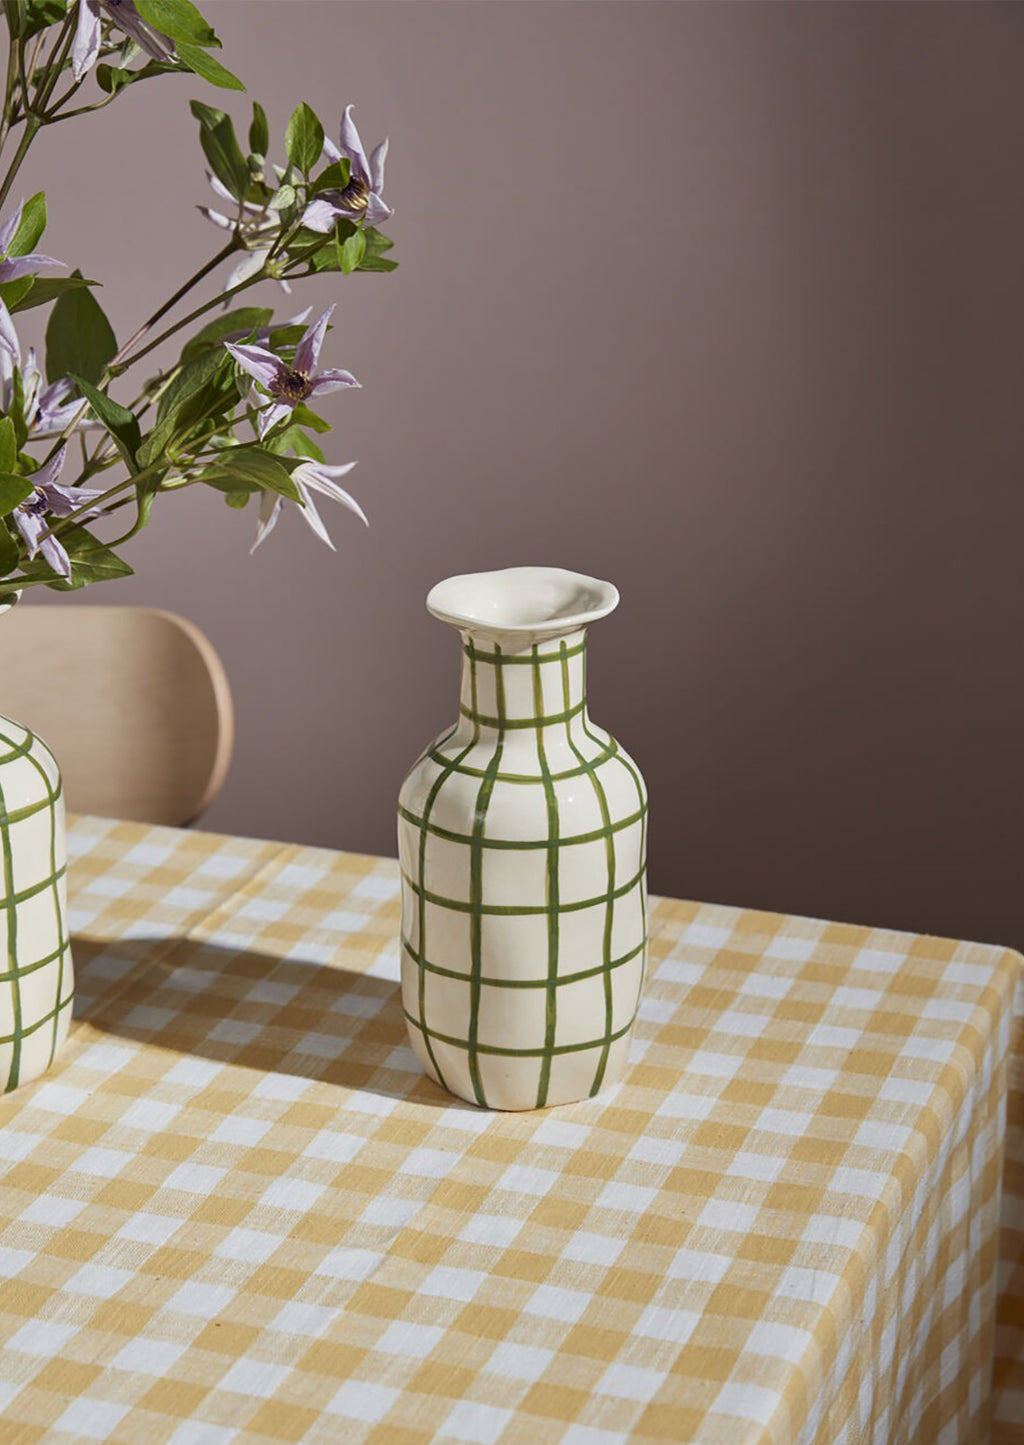 2: A ceramic vase in white with green grid pattern.